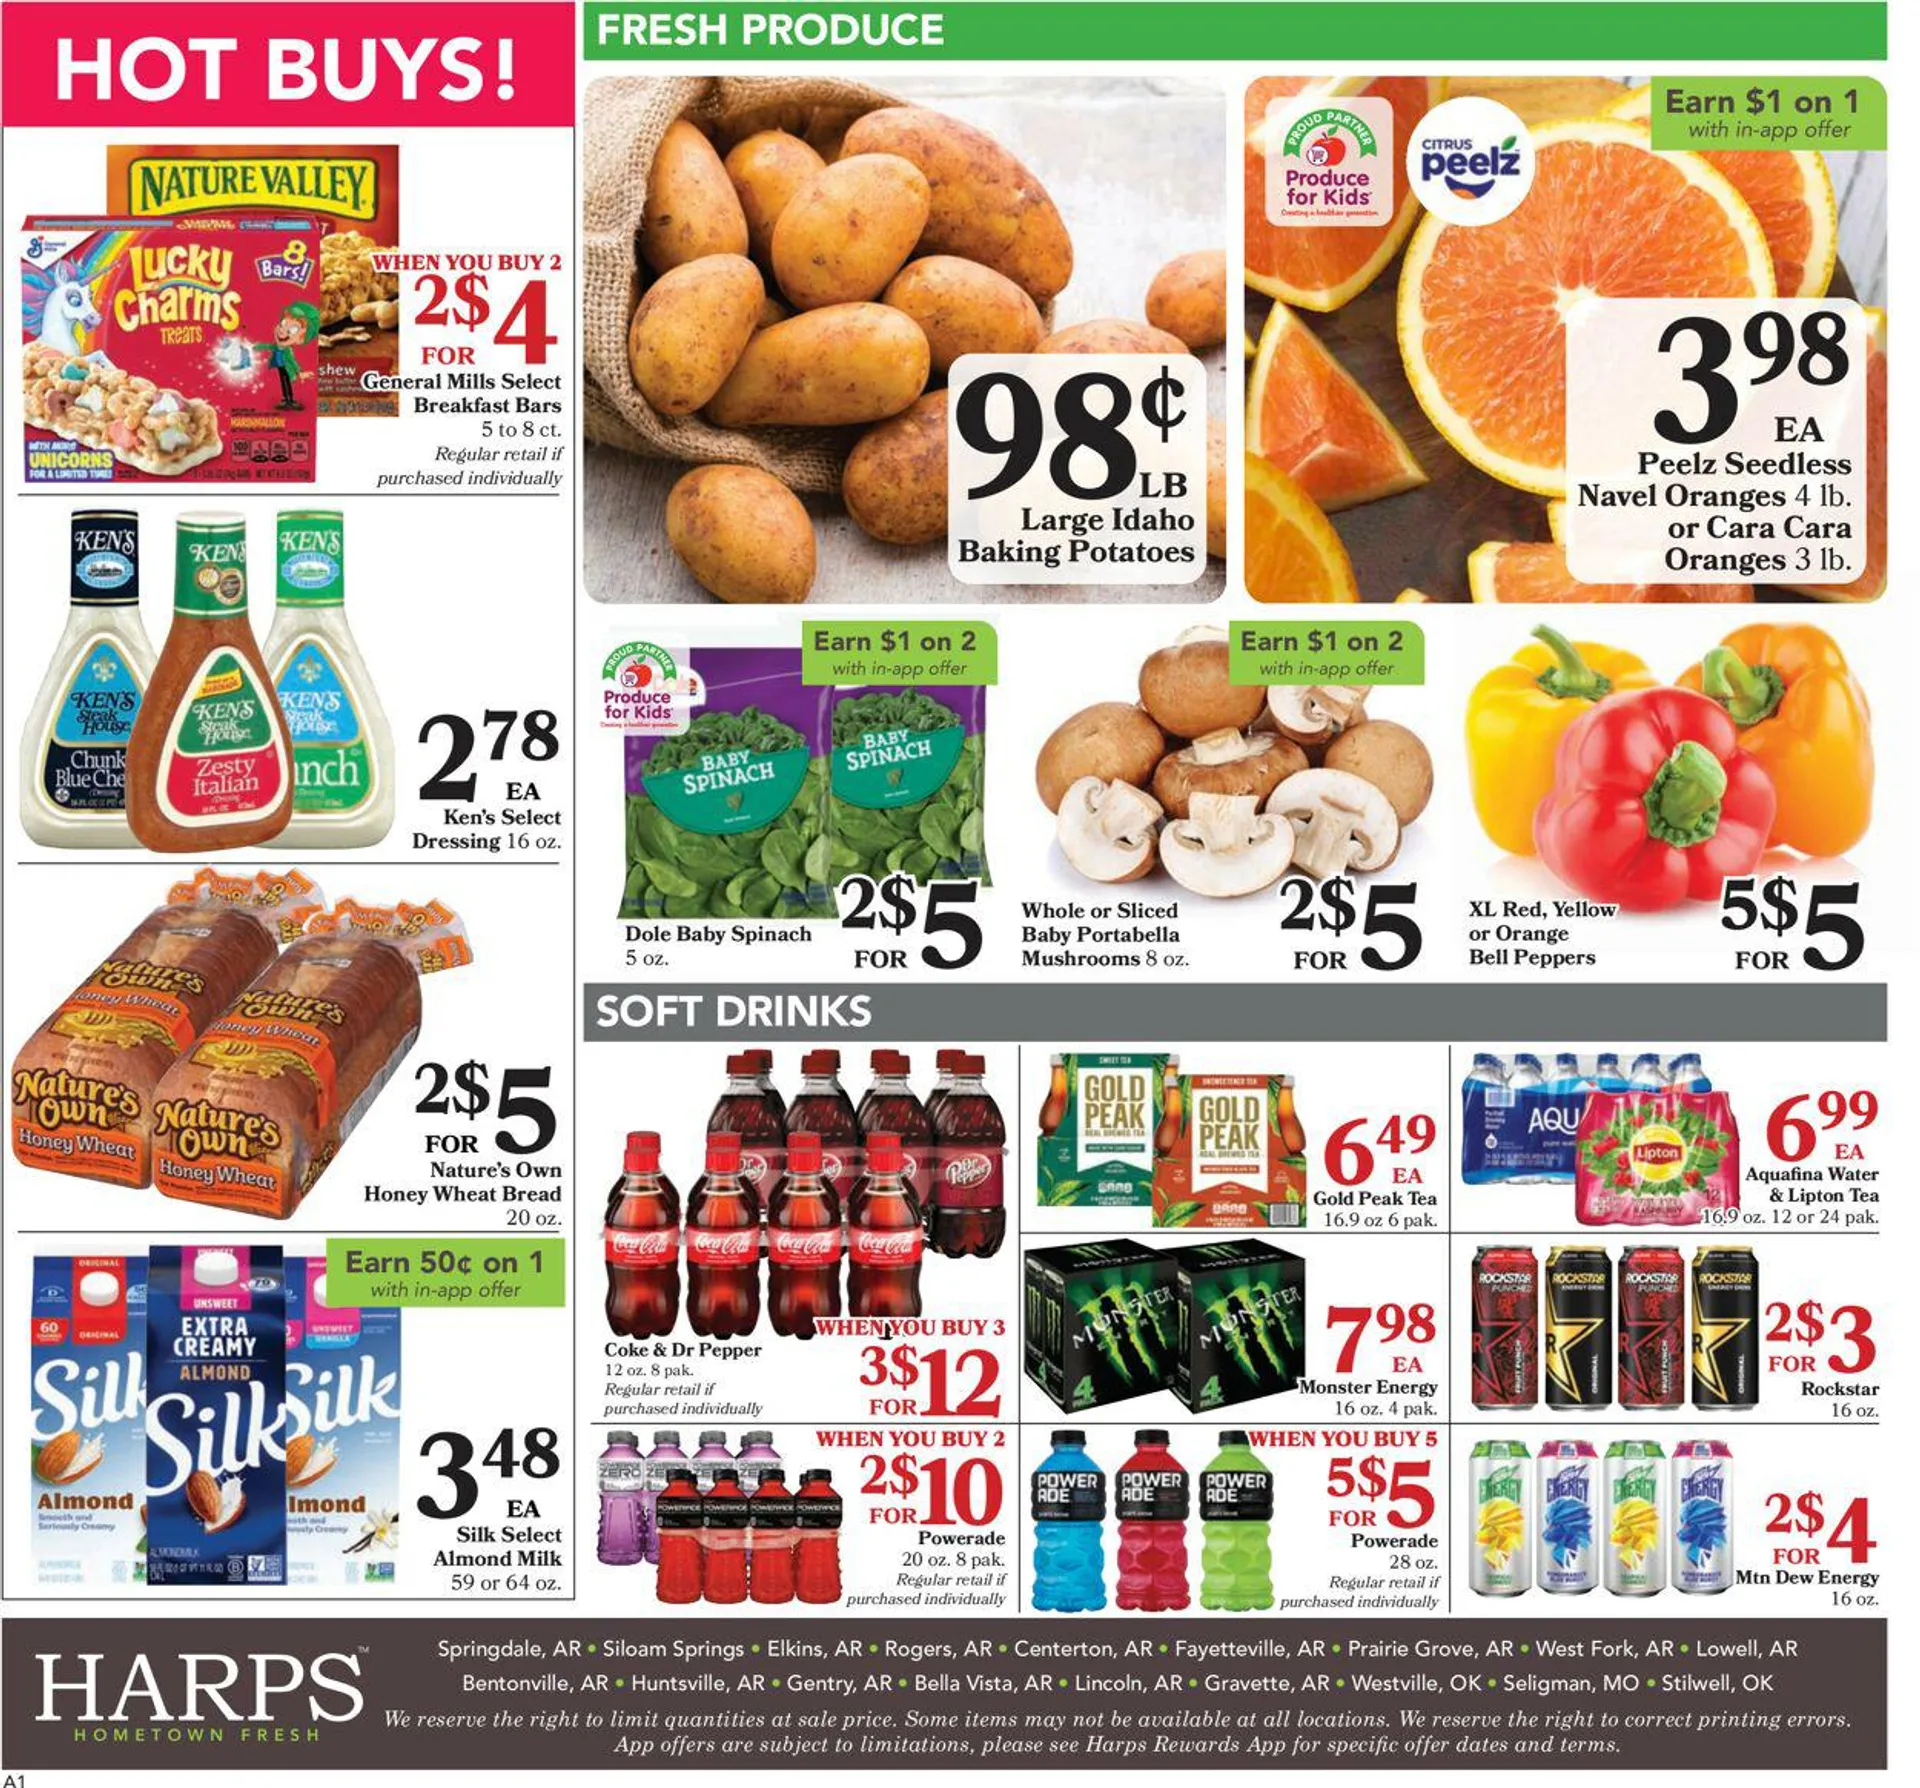 Harps Foods Current weekly ad - 8